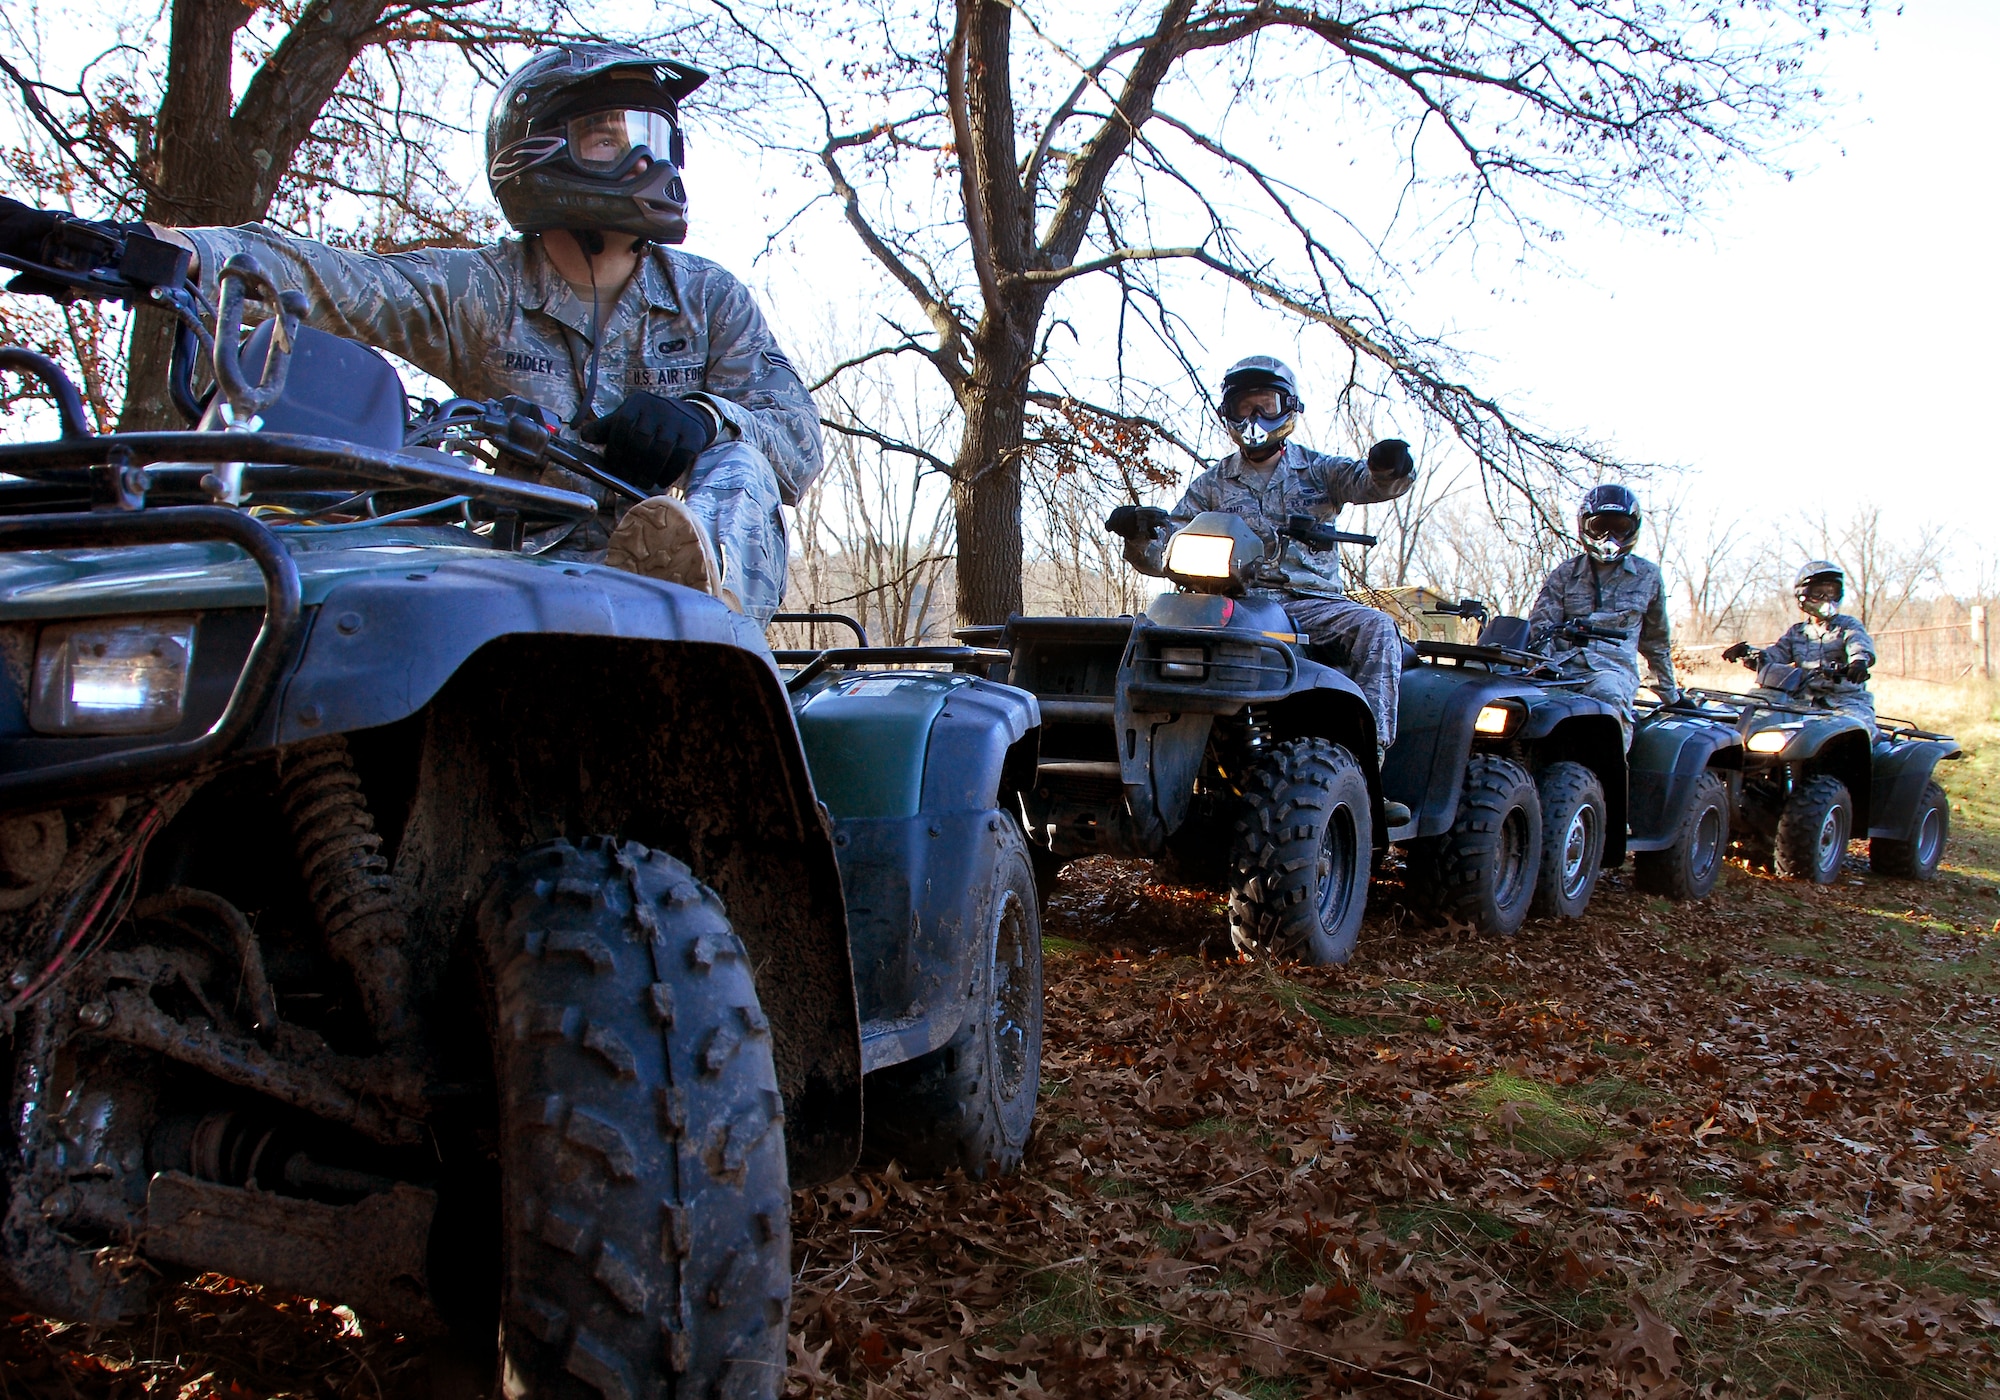 Airmen First Class Justin Padley (left) awaits his turn to navigate a hill with his All Terrain Vehicle during a training course of instruction at Volk Field Combat Readiness Training Center Nov. 1, 2009.  115th SF Airmen attended this training course to learn how to operate an A.T.V in various environments, a requirement for their job. (U.S. Air Force photo by Staff Sgt. Christen Bloomfield)